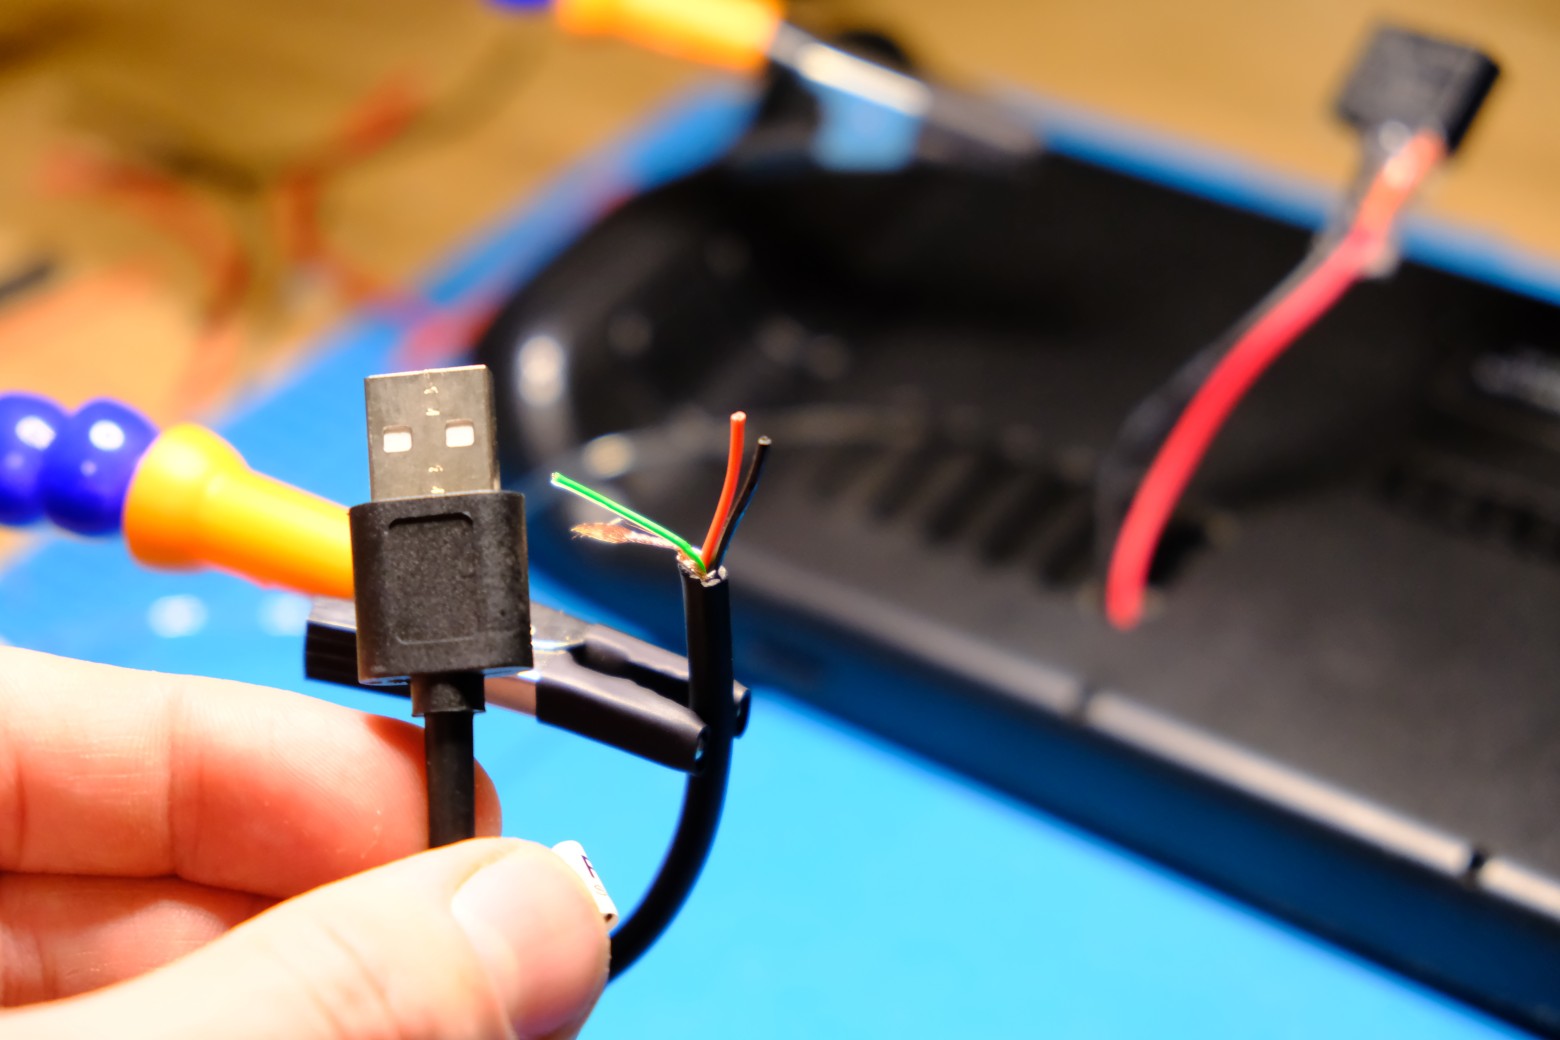 Cut the end of a USB-A cable, find the VBUS+ and GND wires